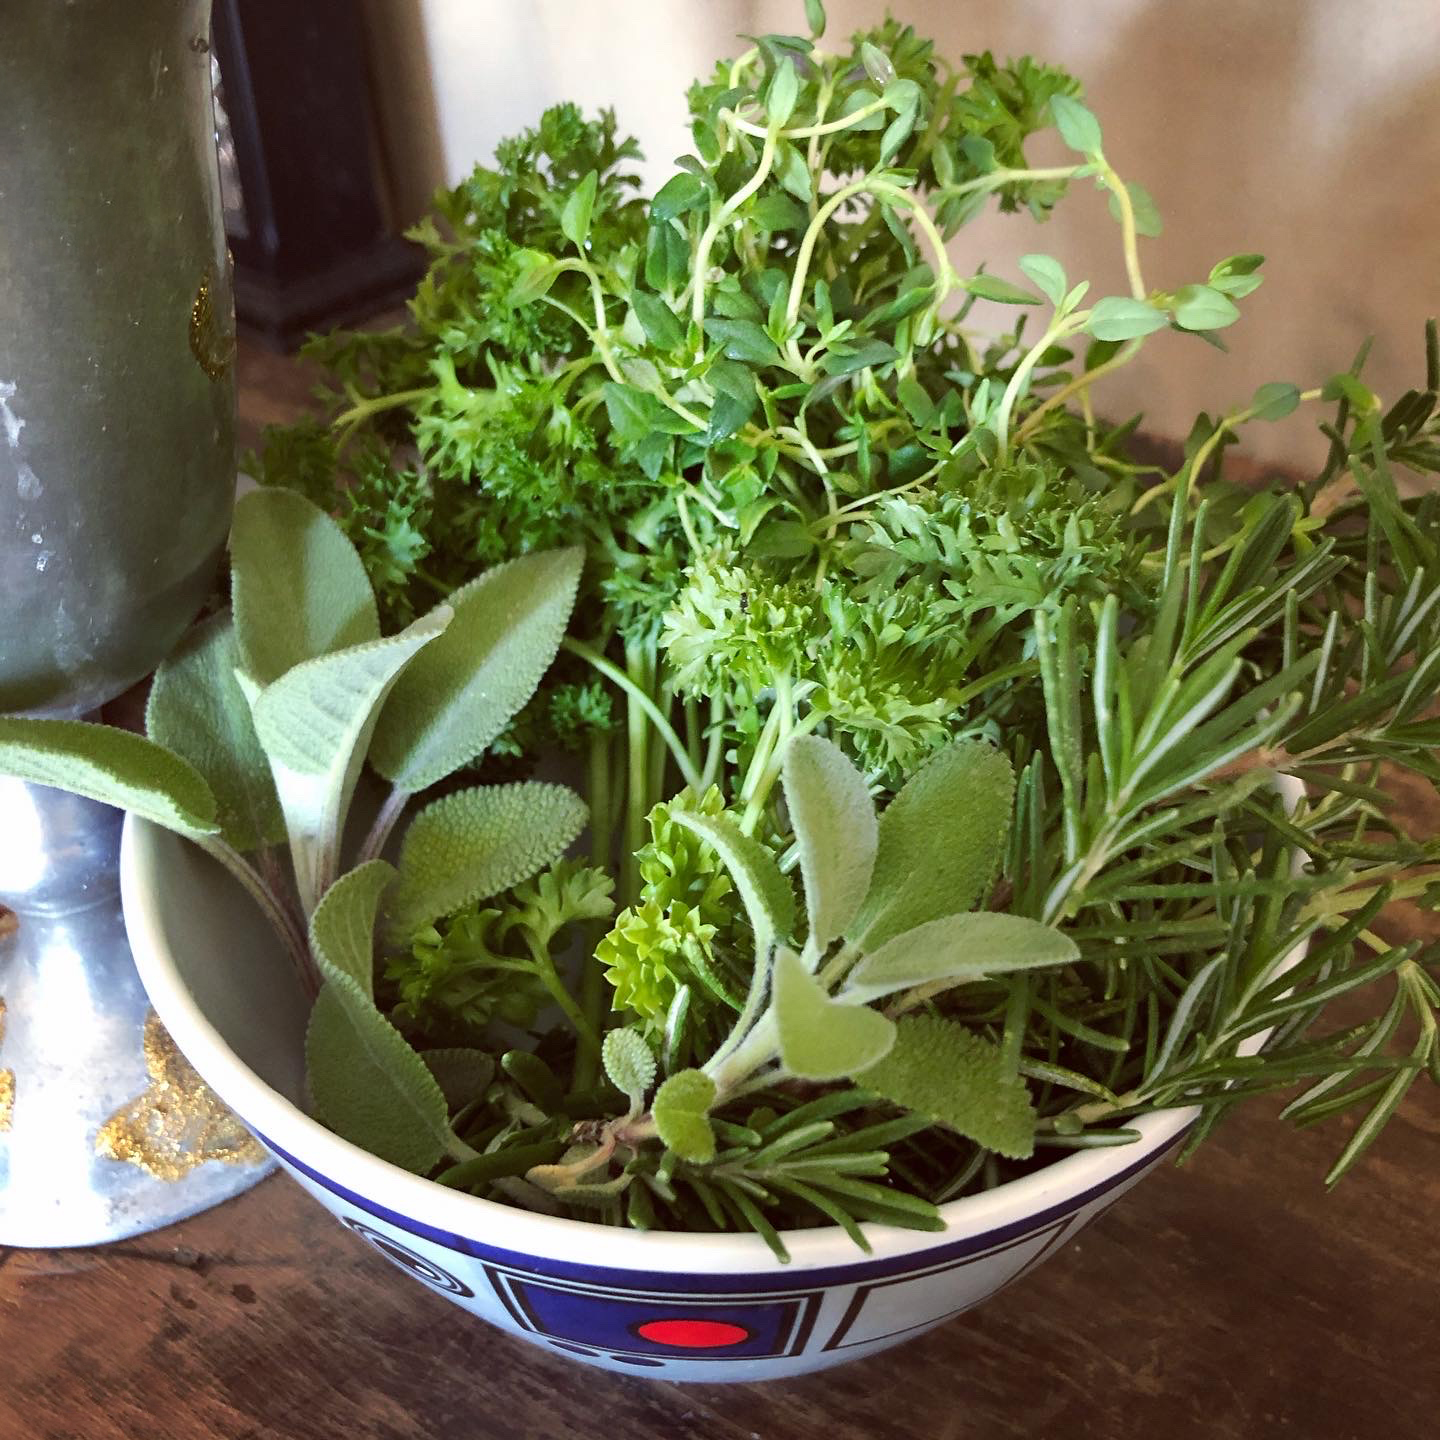 Scarborough Fair - Parsley Sage Rosemary and Thyme